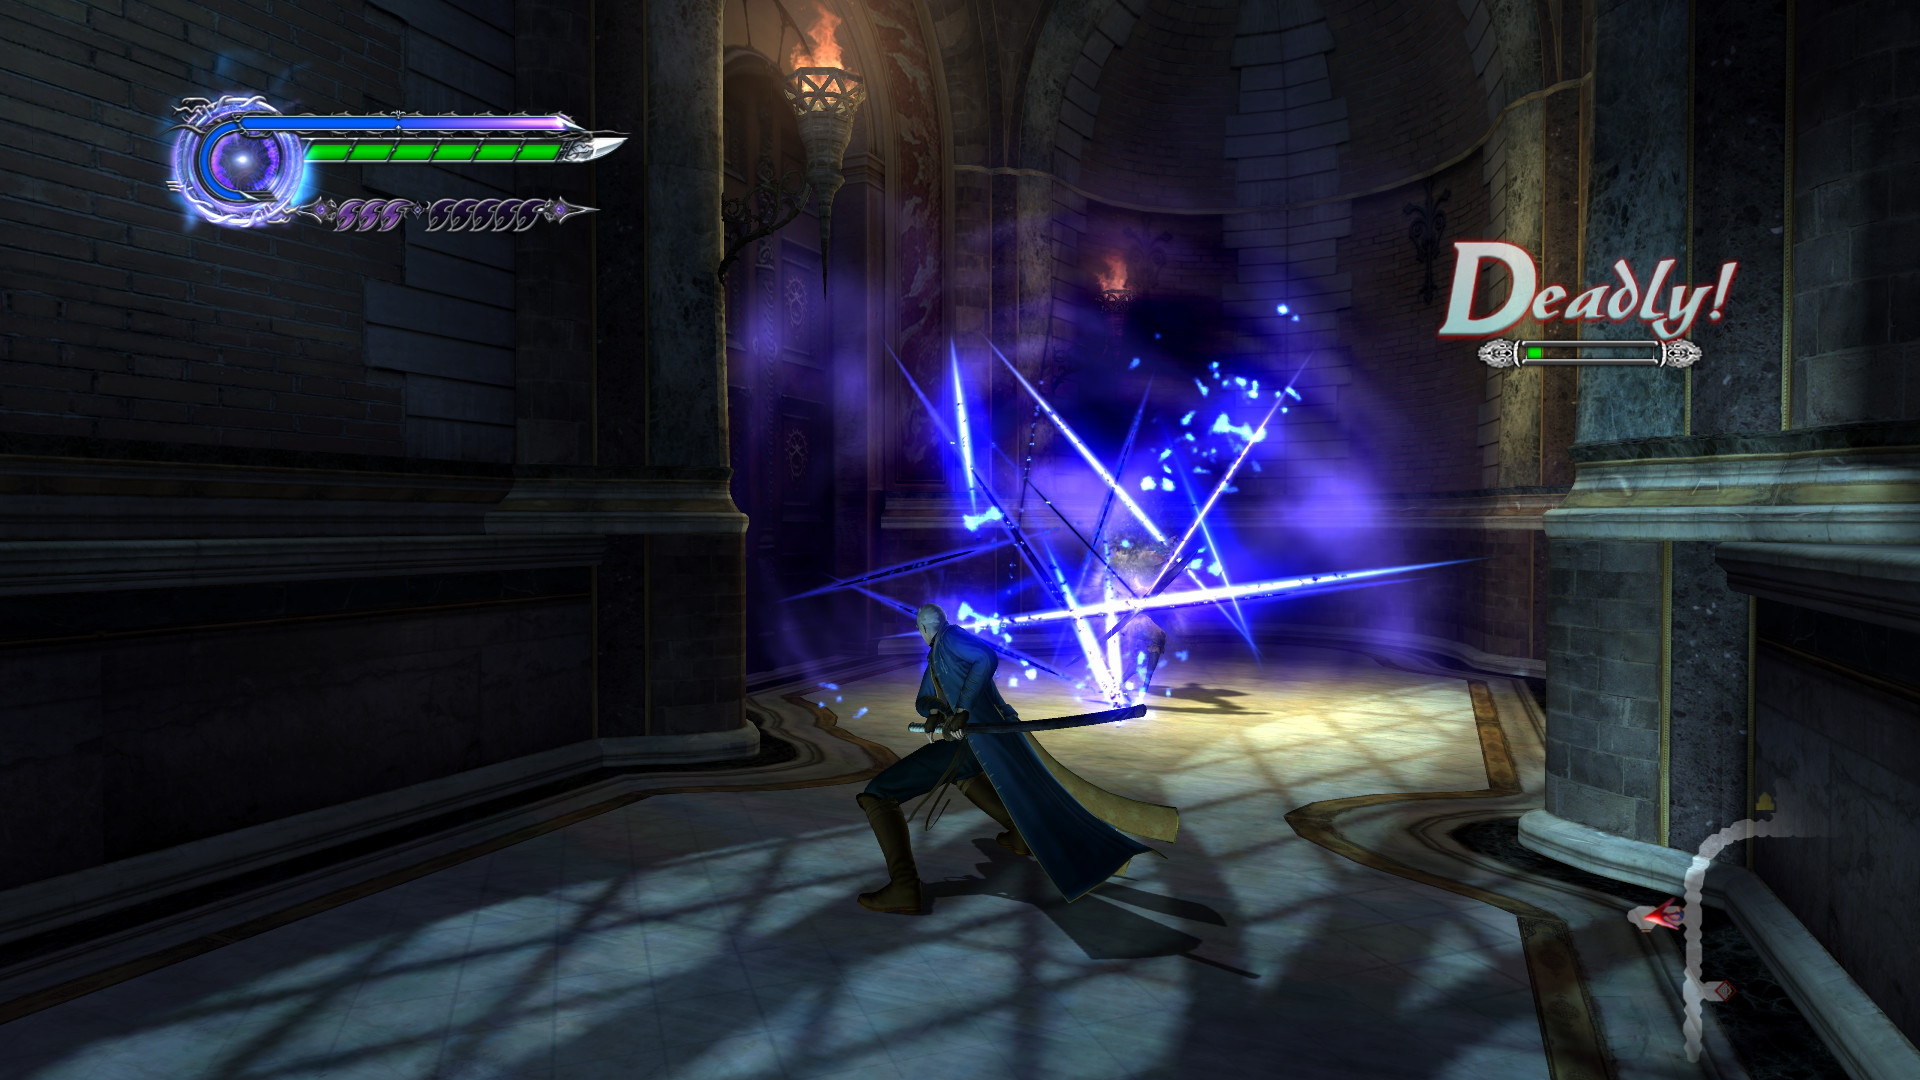 Devil May Cry 4 Special Edition screenshot